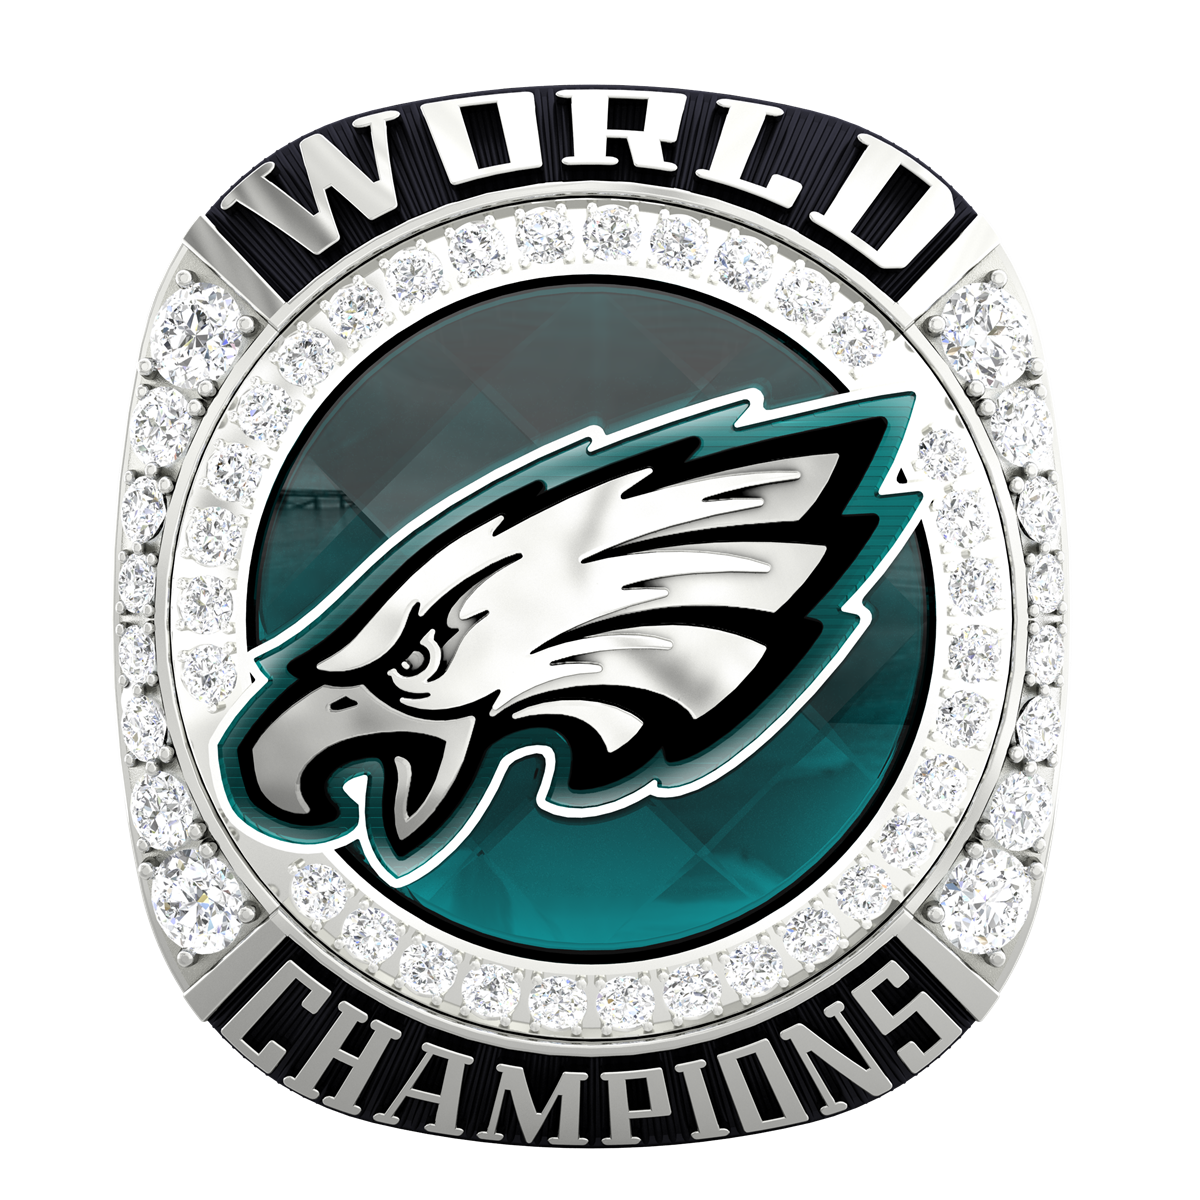 Buy your own Eagles Super Bowl ring: Look at the Super 